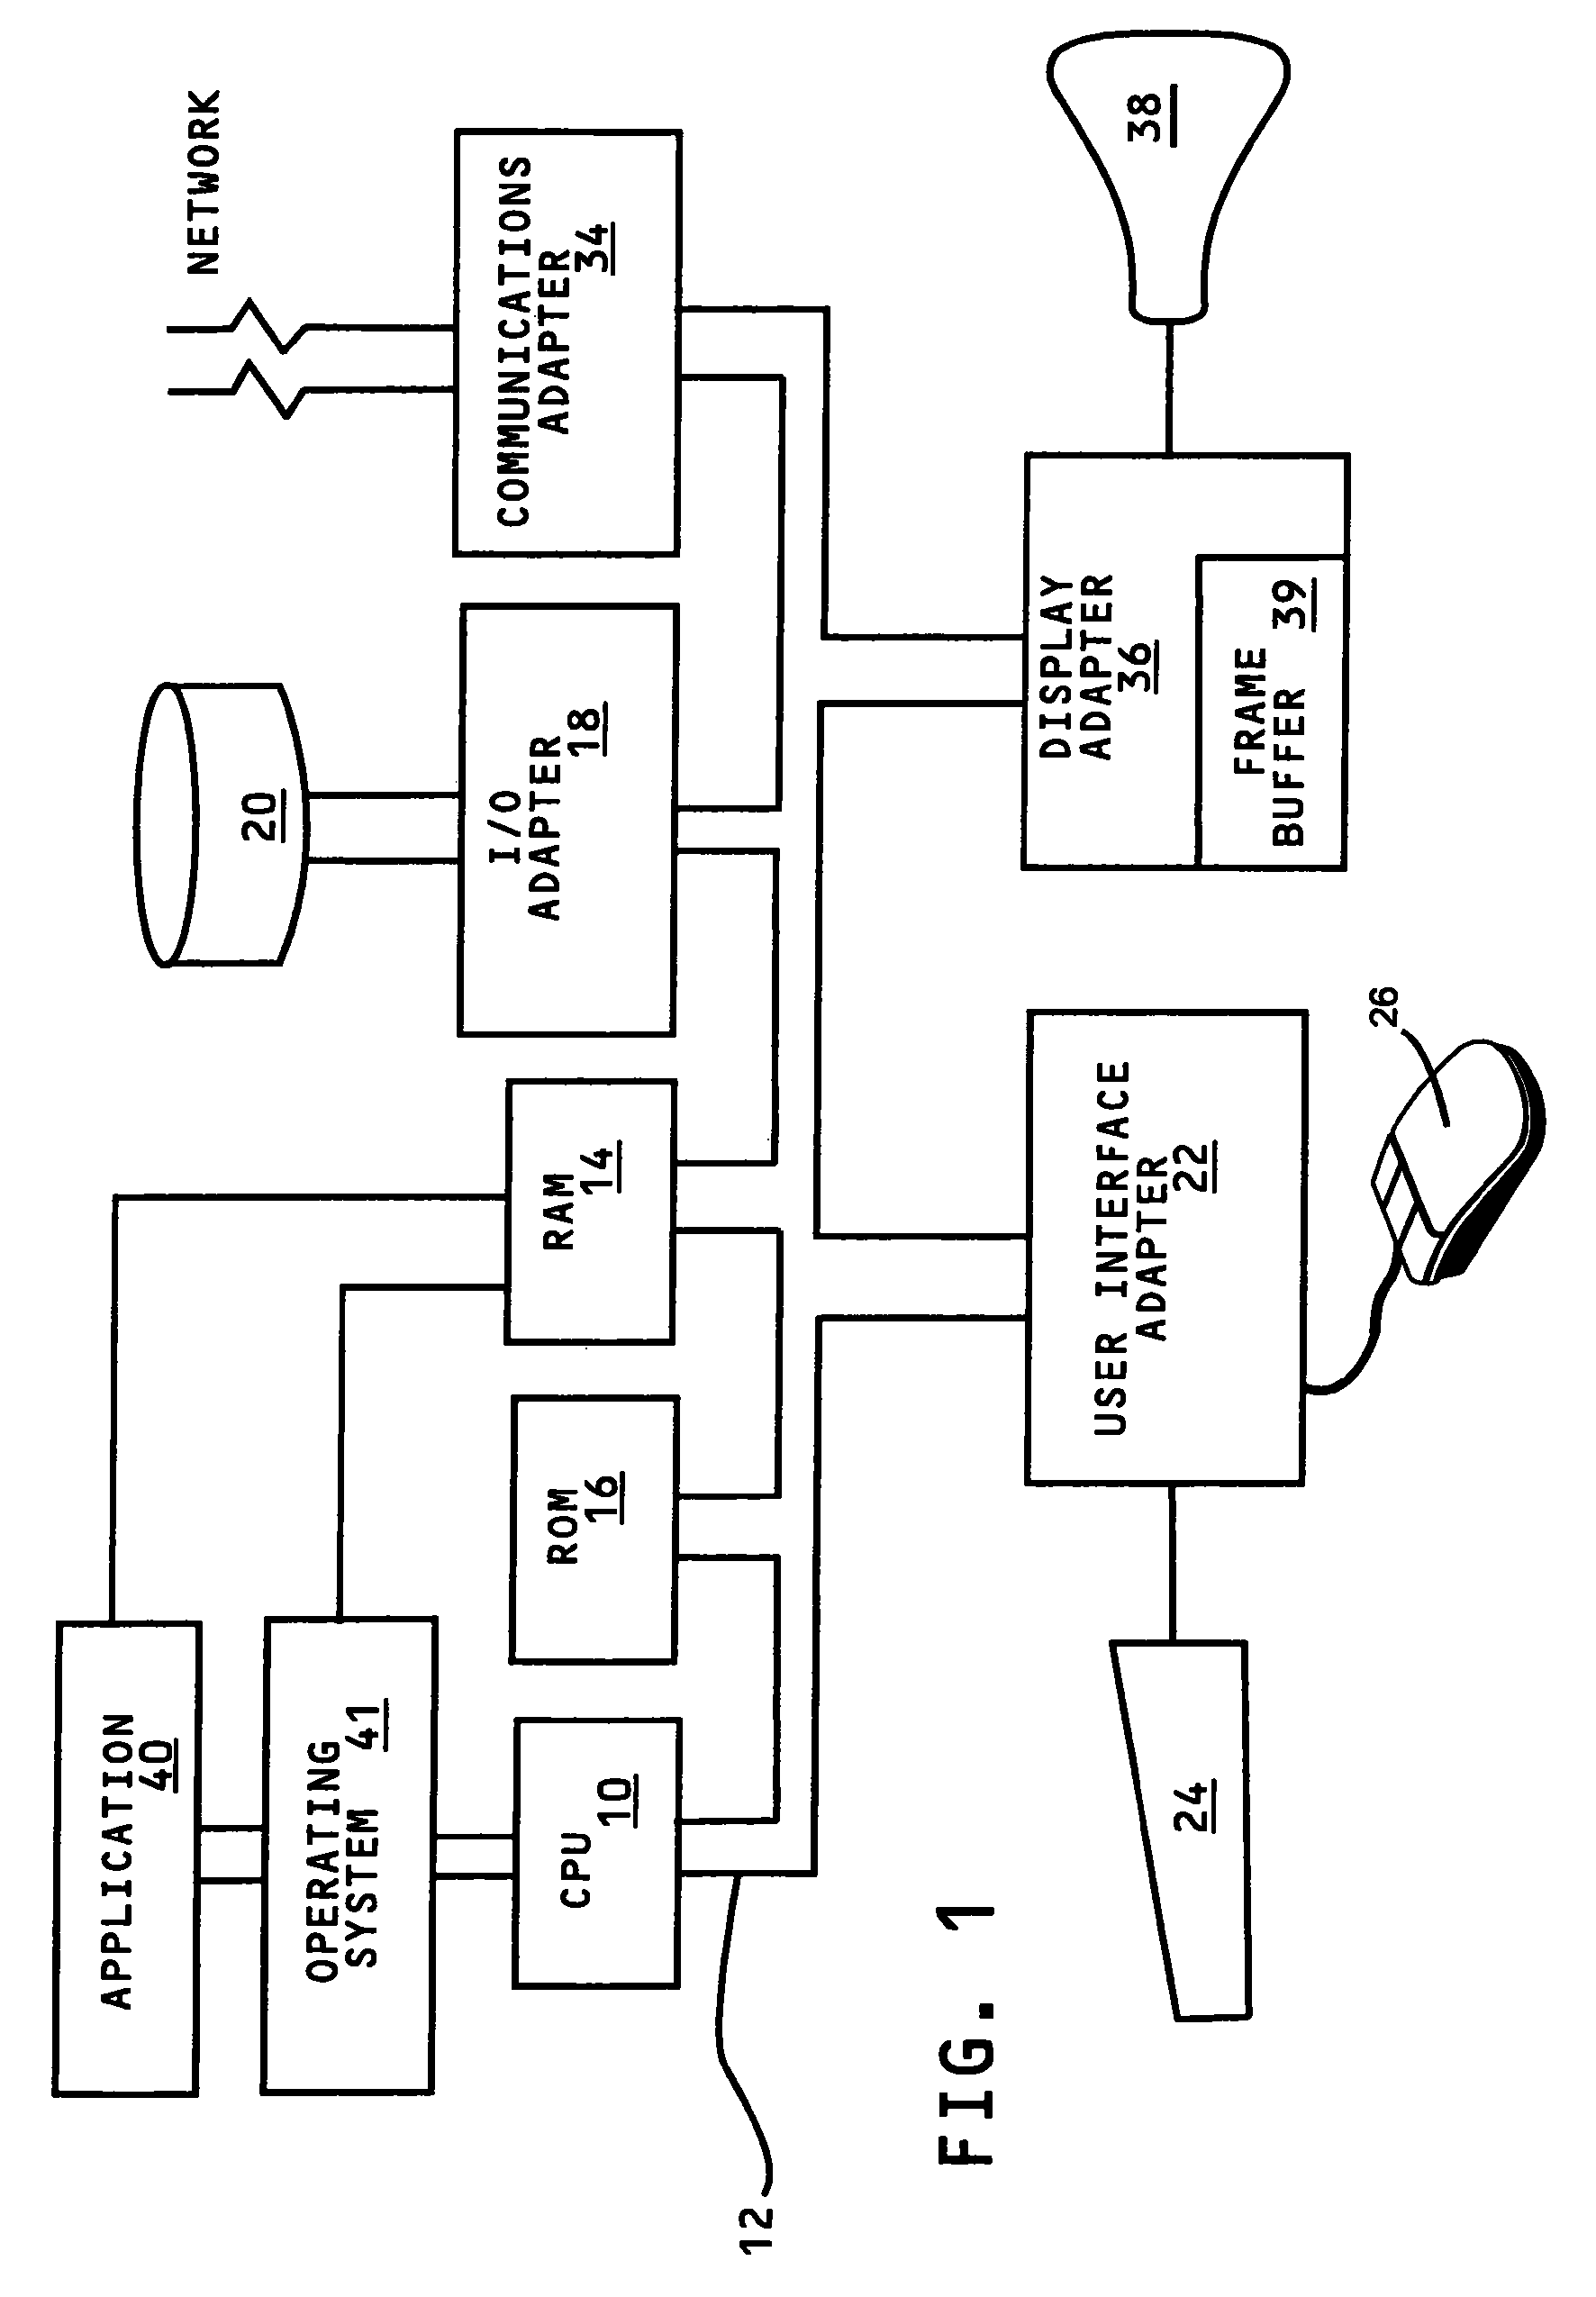 Computer controlled user interactive display interface for accessing graphic tools with a minimum of display pointer movement